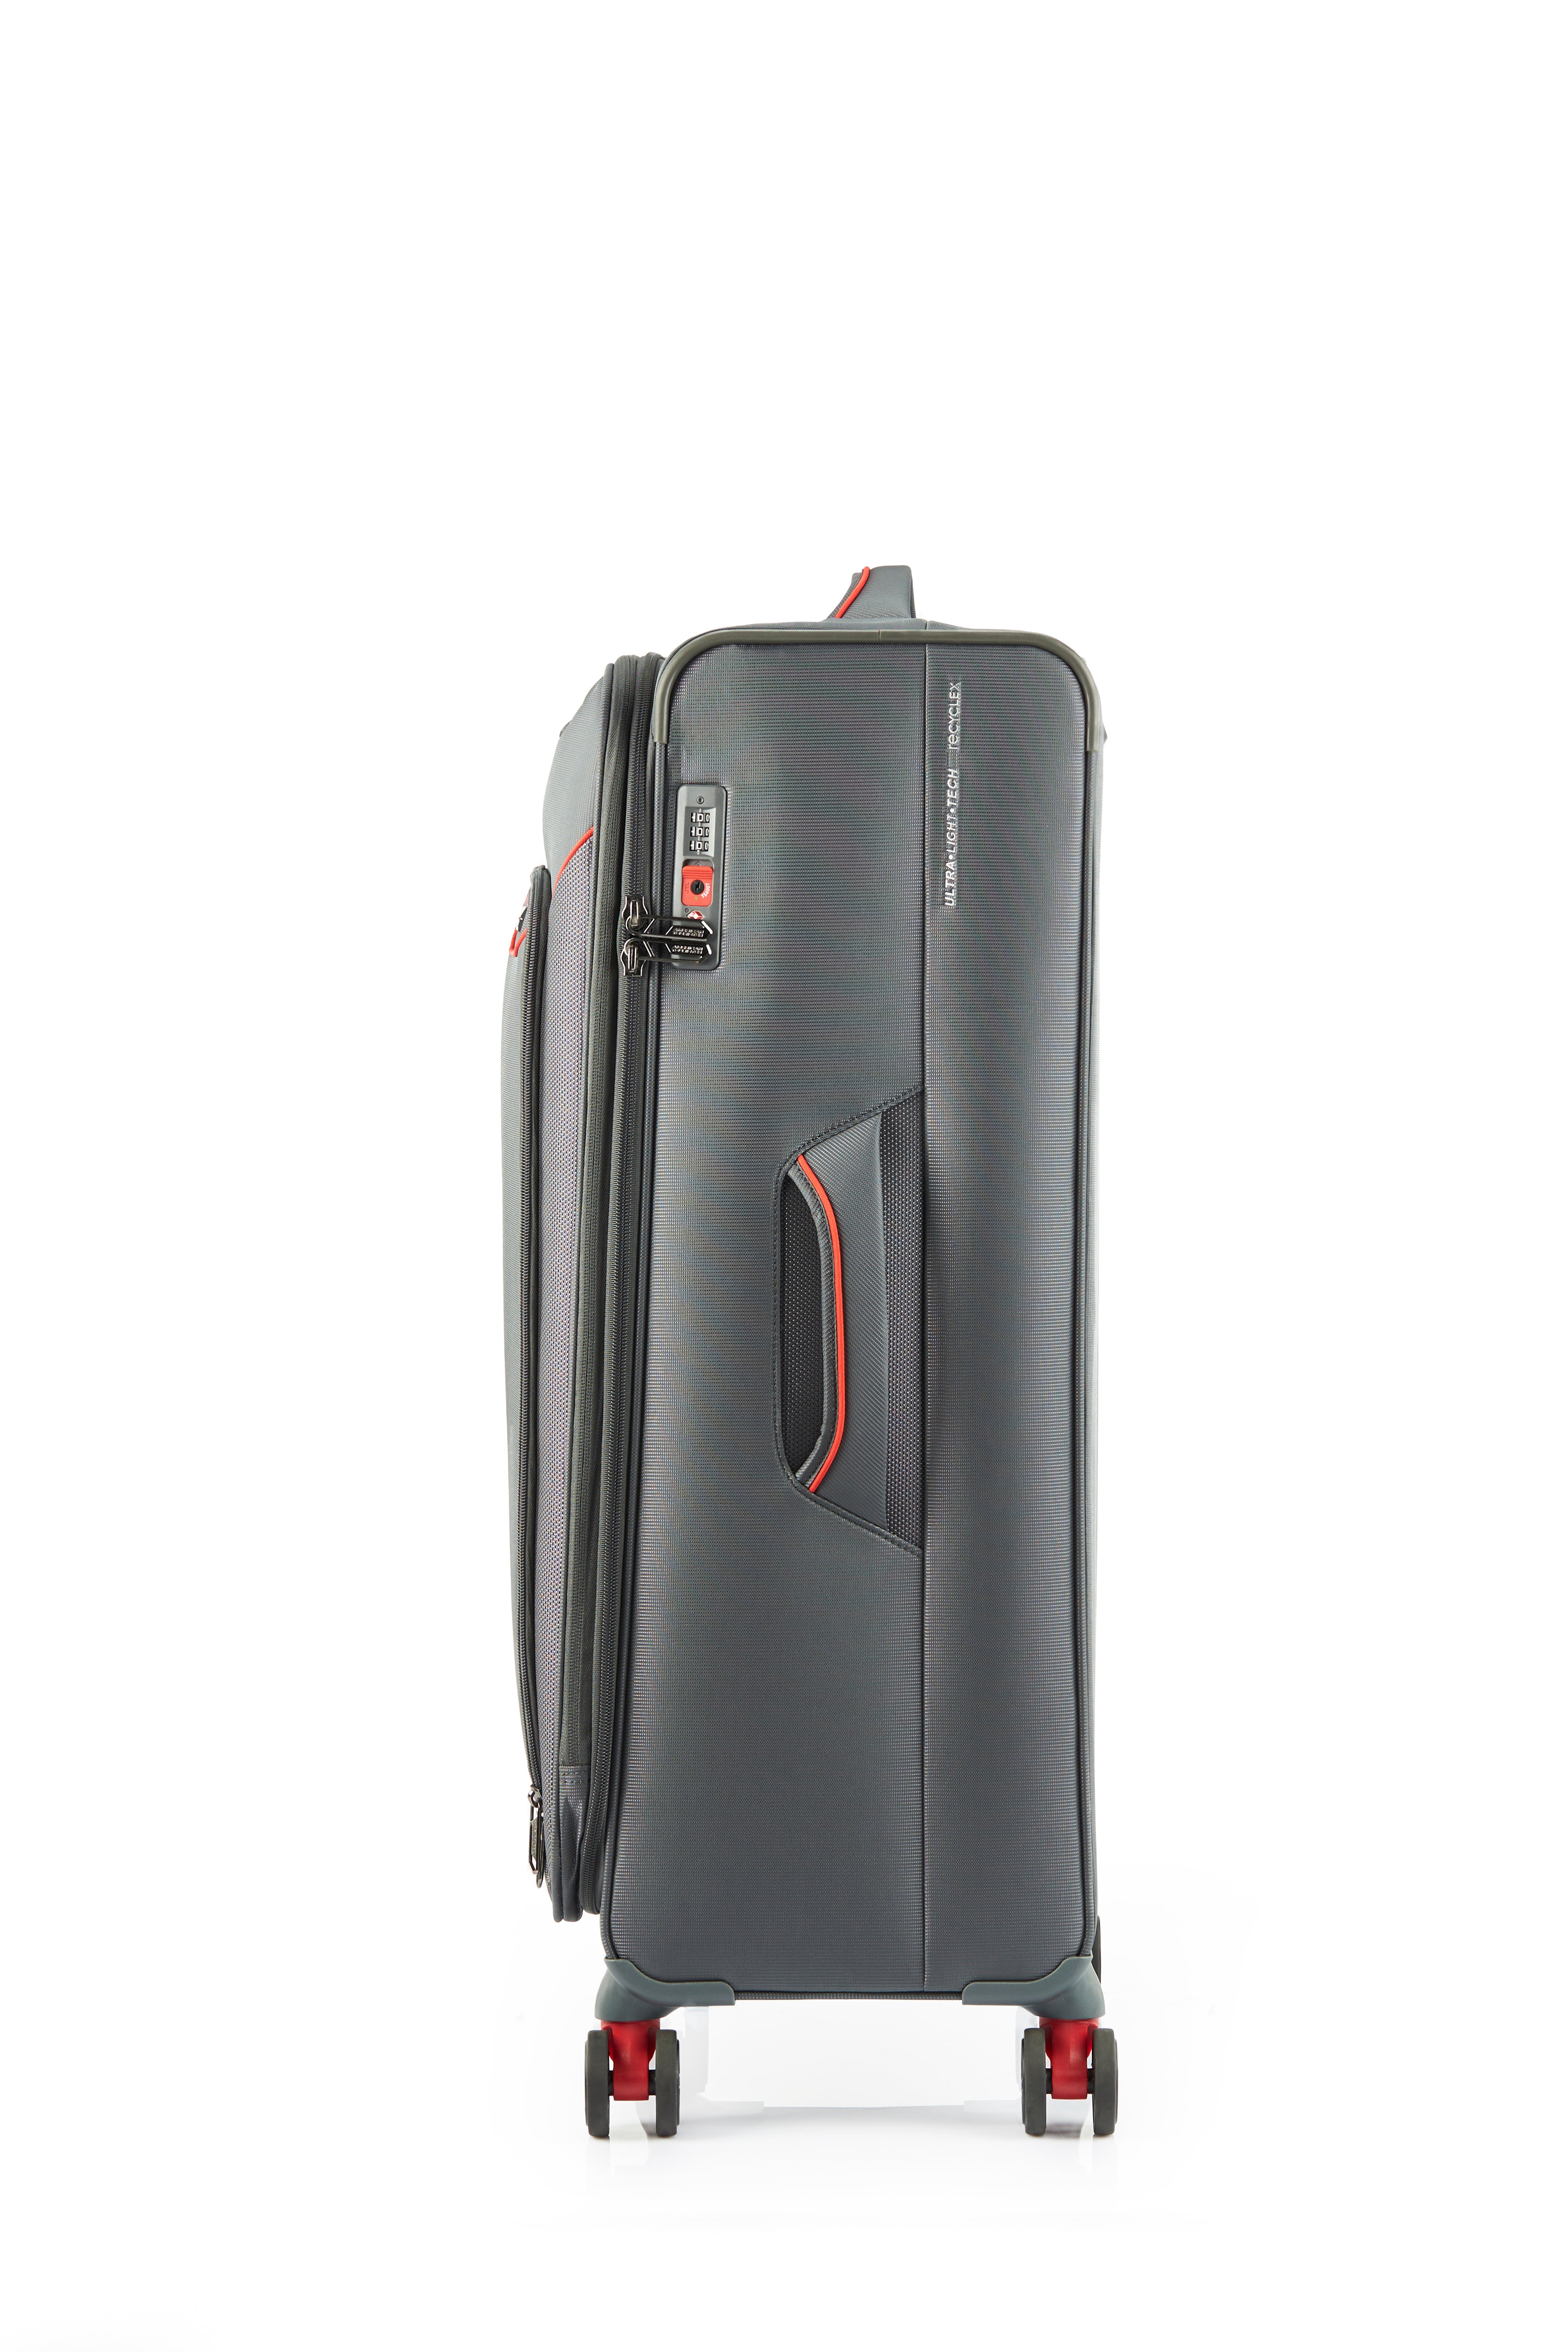 American Tourister - Applite ECO 82cm Large Suitcase - Grey/Red-4